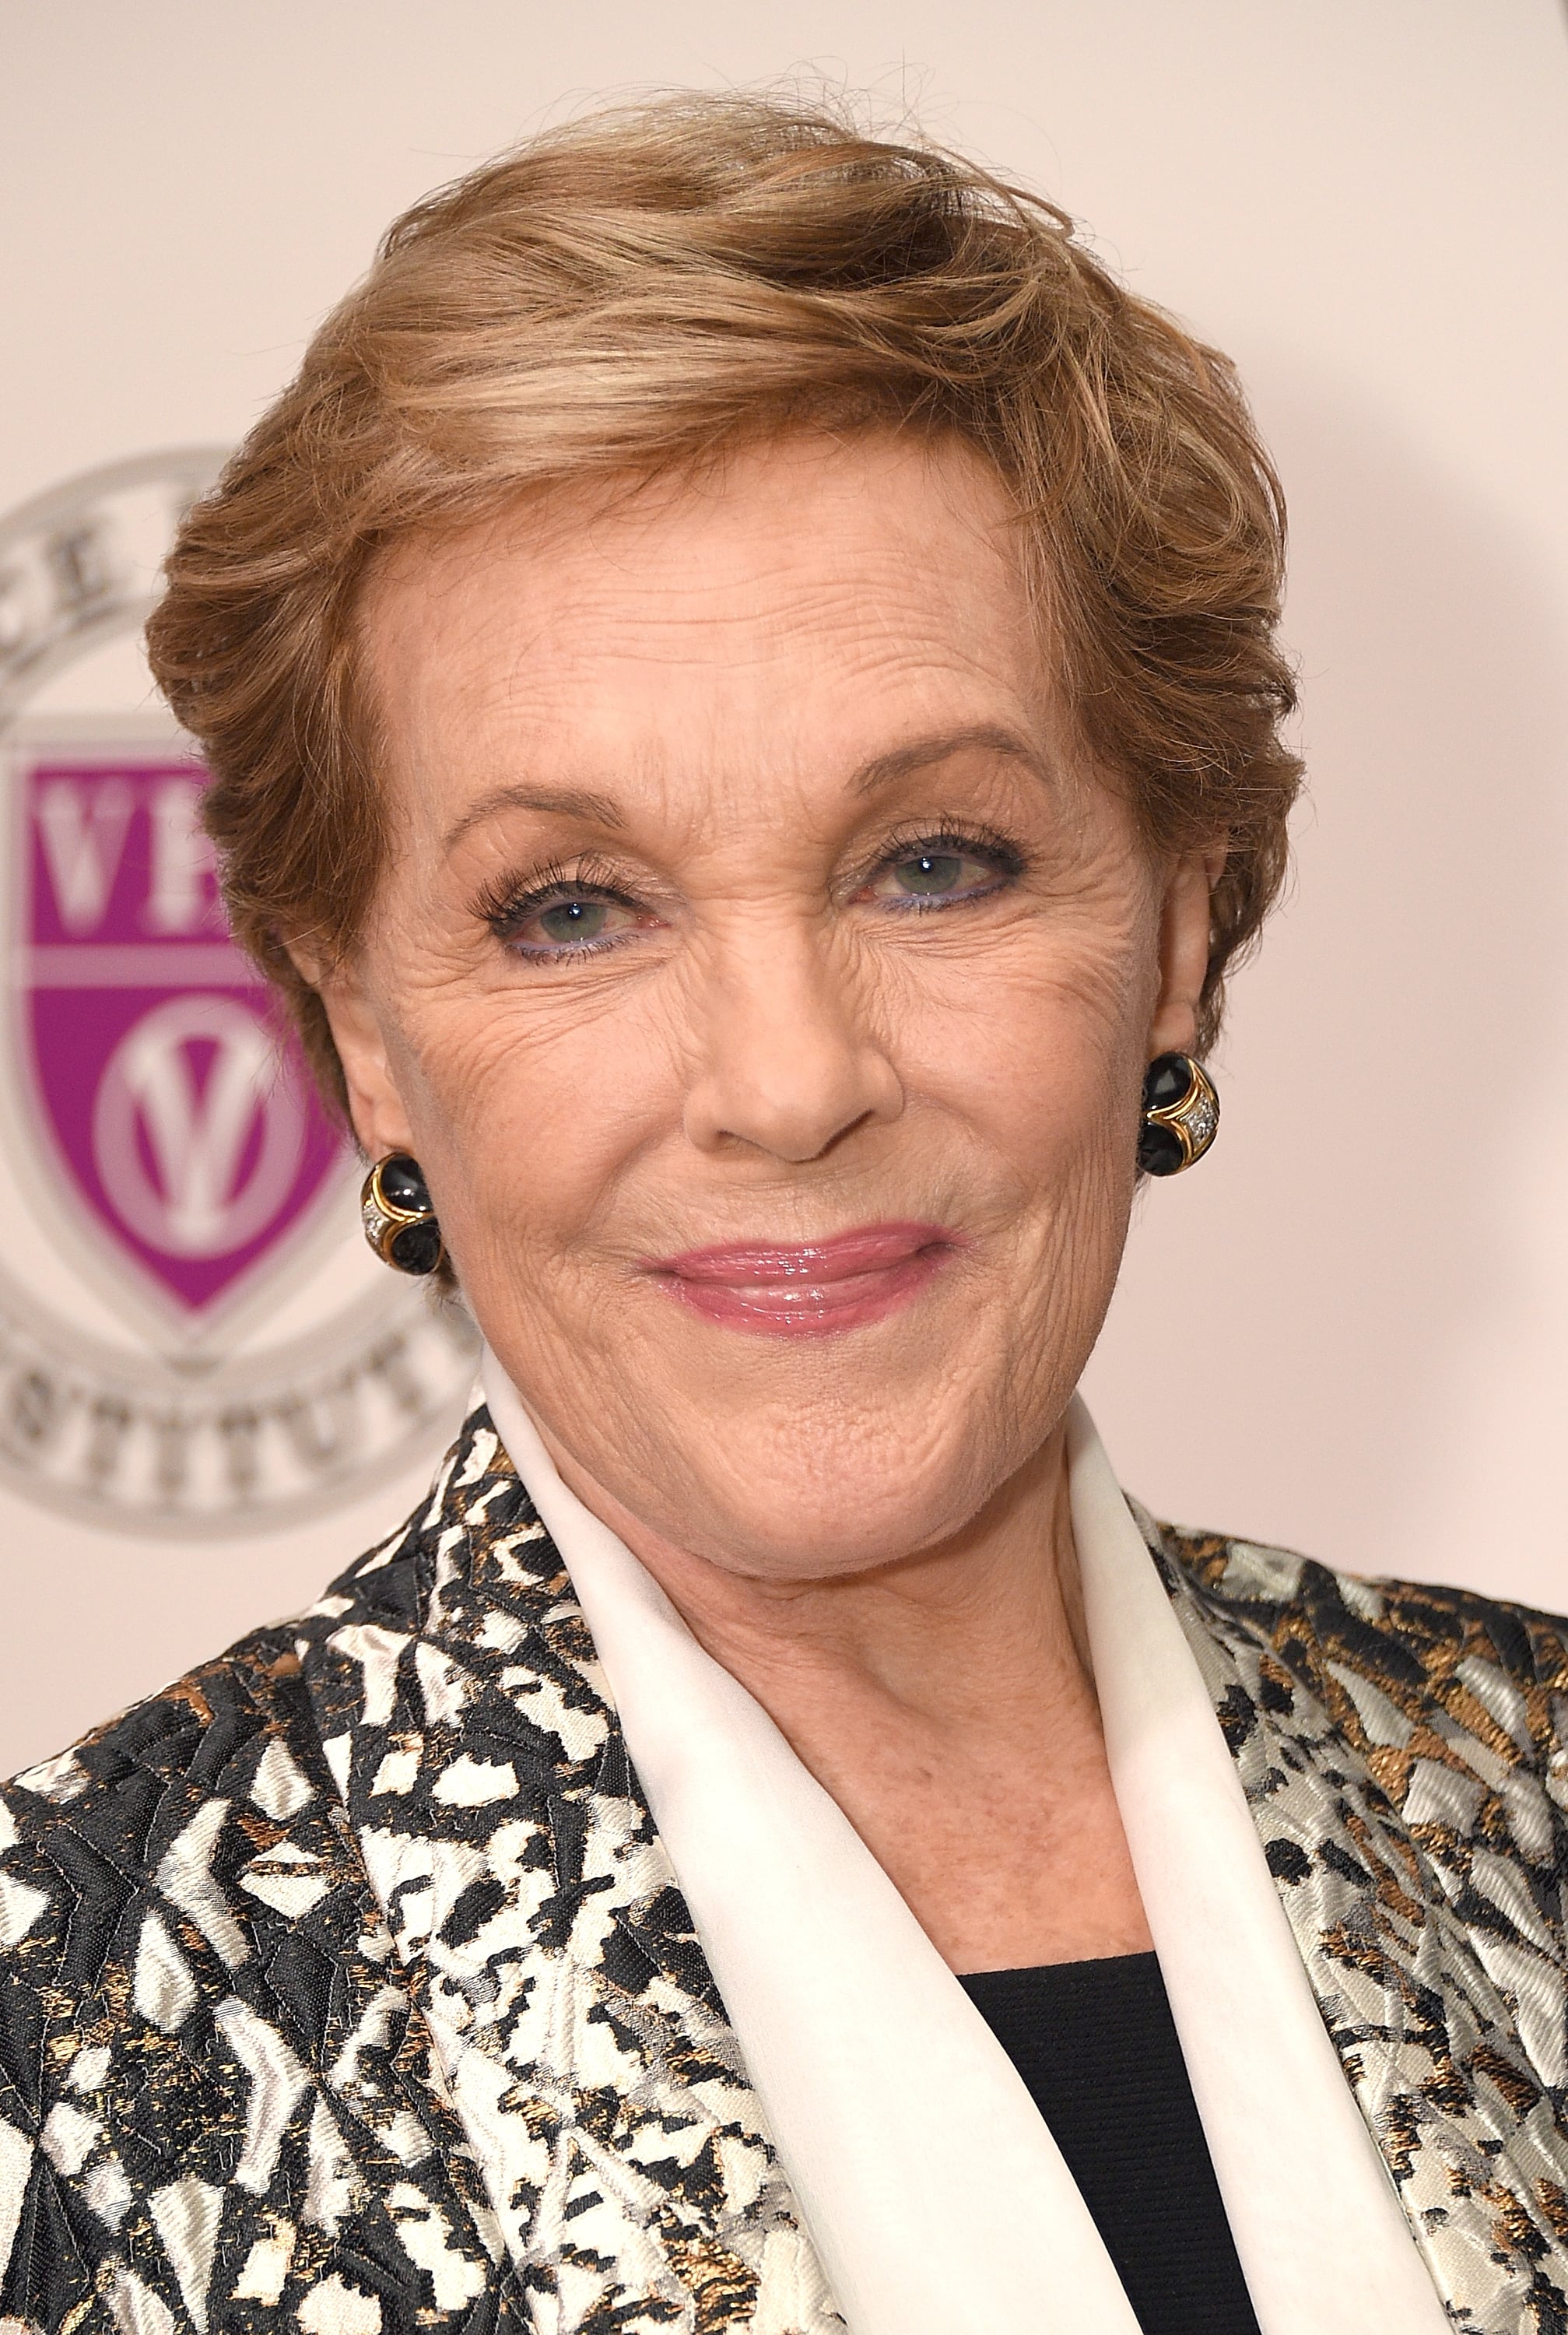 NEW YORK, NY - MARCH 05:  Actress and honouree Julie Andrews attends the red carpet arrivals for the 'Raise Your Voice' concert at Alice Tully Hall, Lincoln Centre on March 5, 2018 in New York City  (Photo by Michael Loccisano/Getty Images)